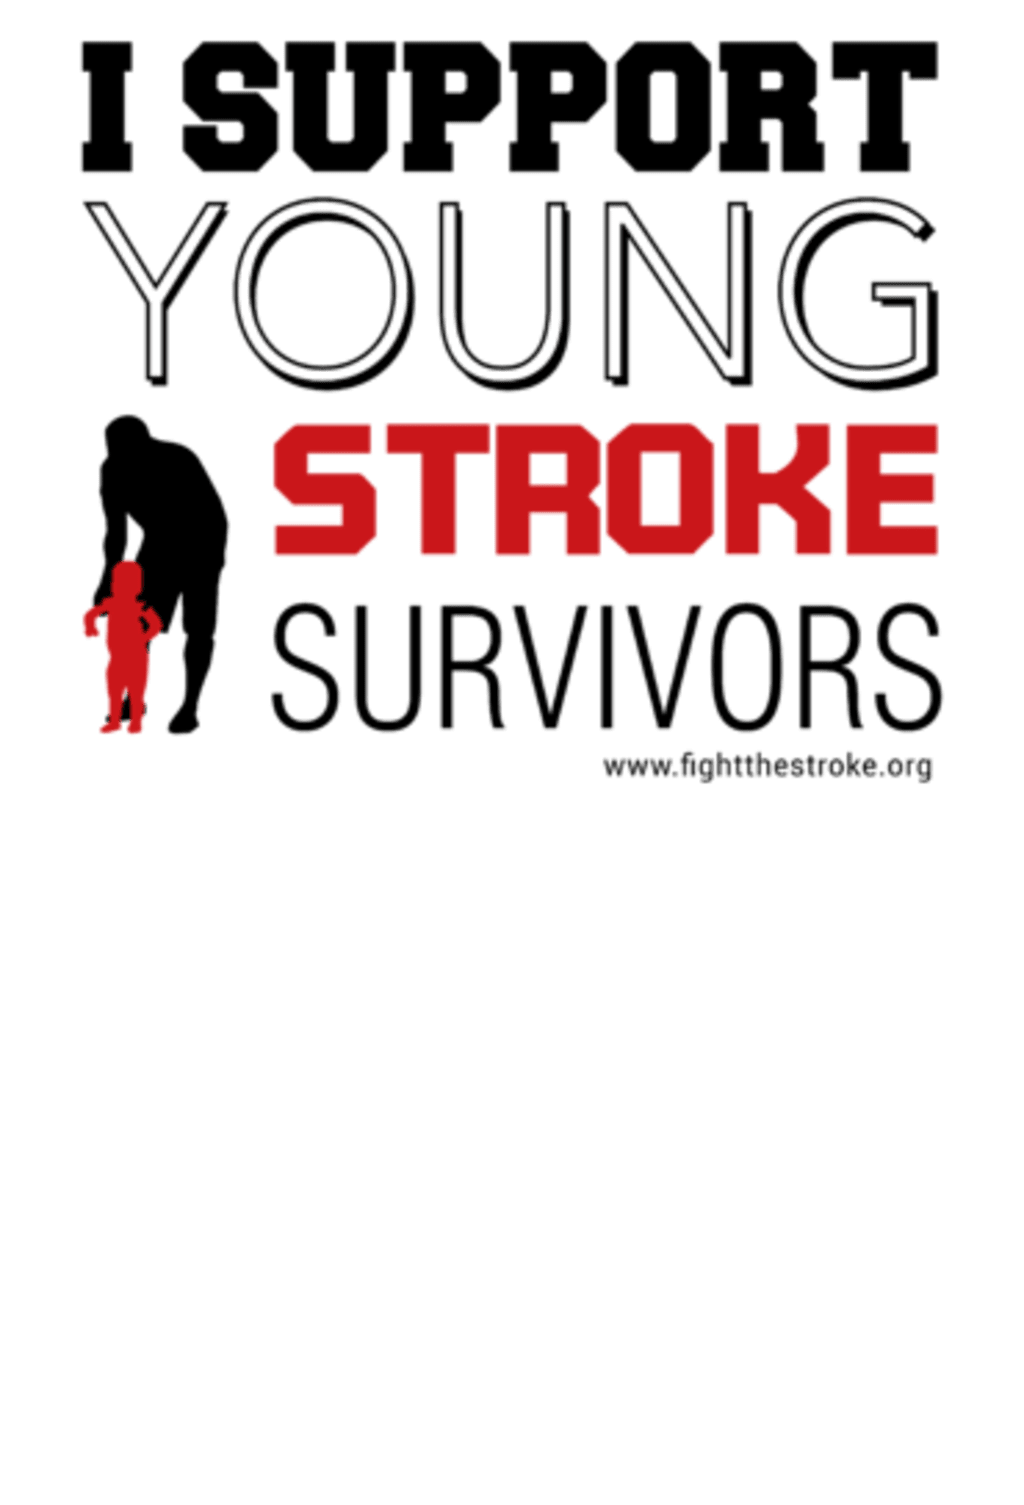 Support young stroke survivors Typography bianca